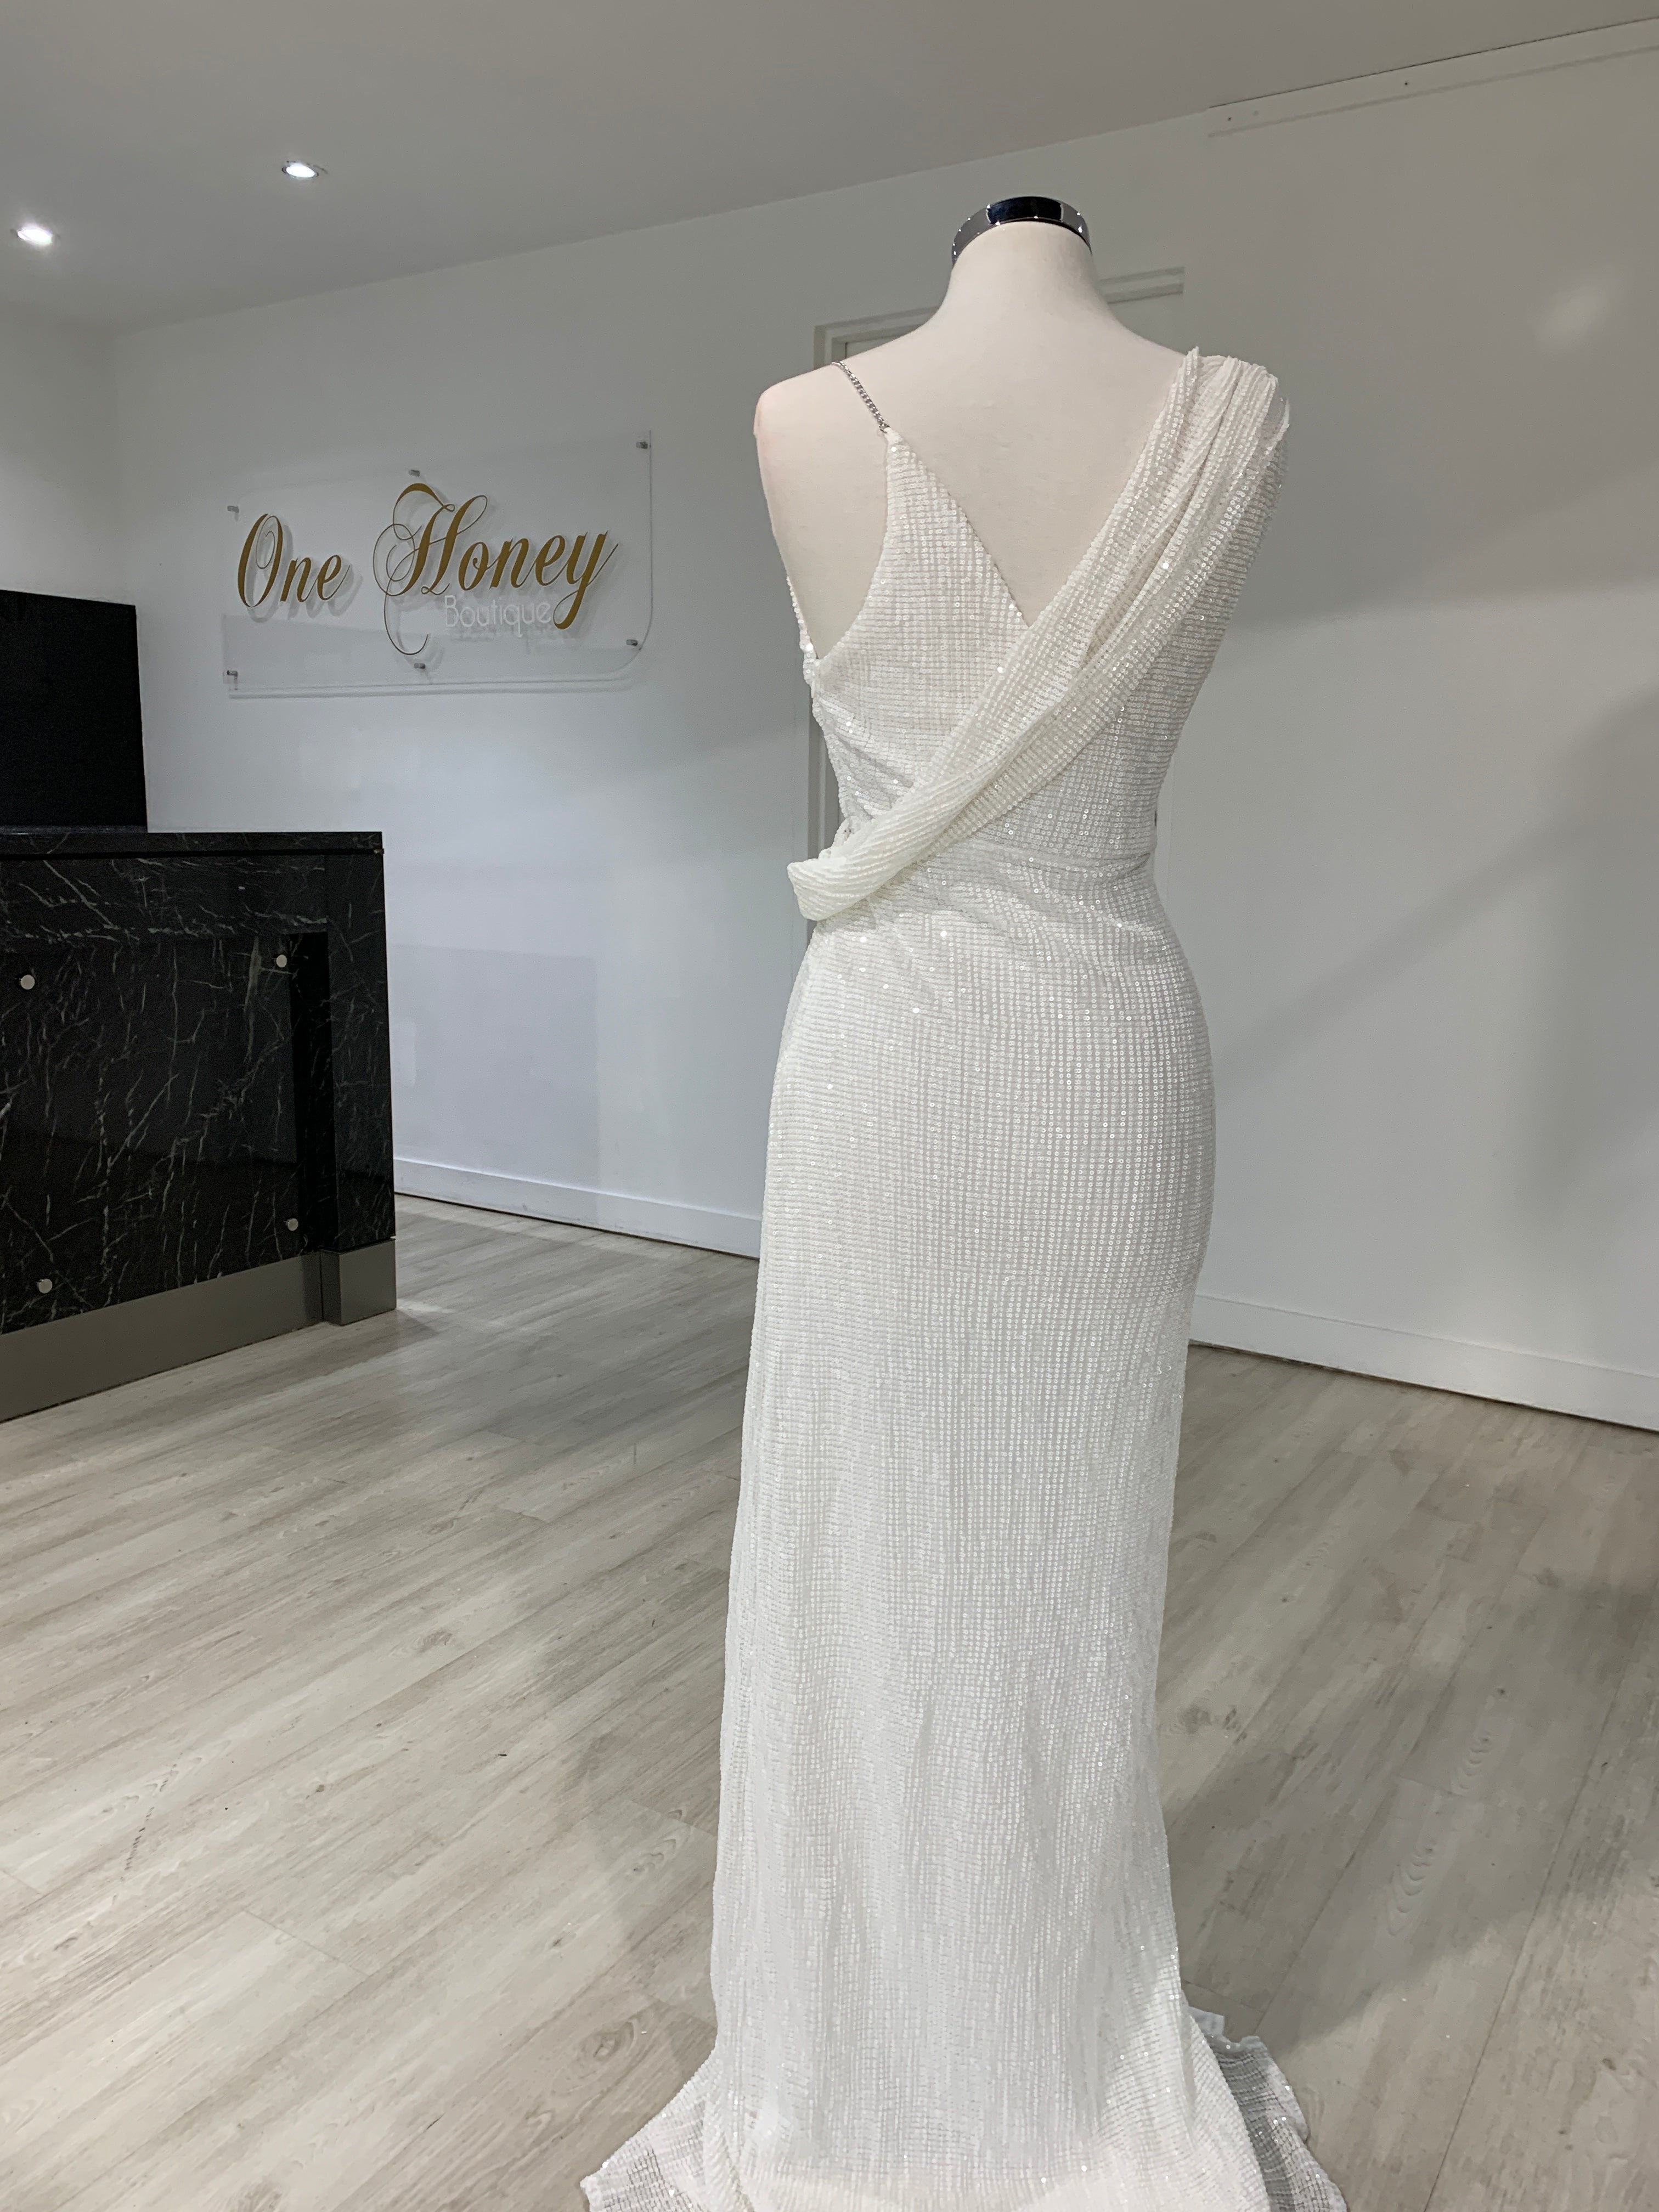 Honey Couture SHANIKA White One Sleeve Sequin Formal Dress {vendor} AfterPay Humm ZipPay LayBuy Sezzle